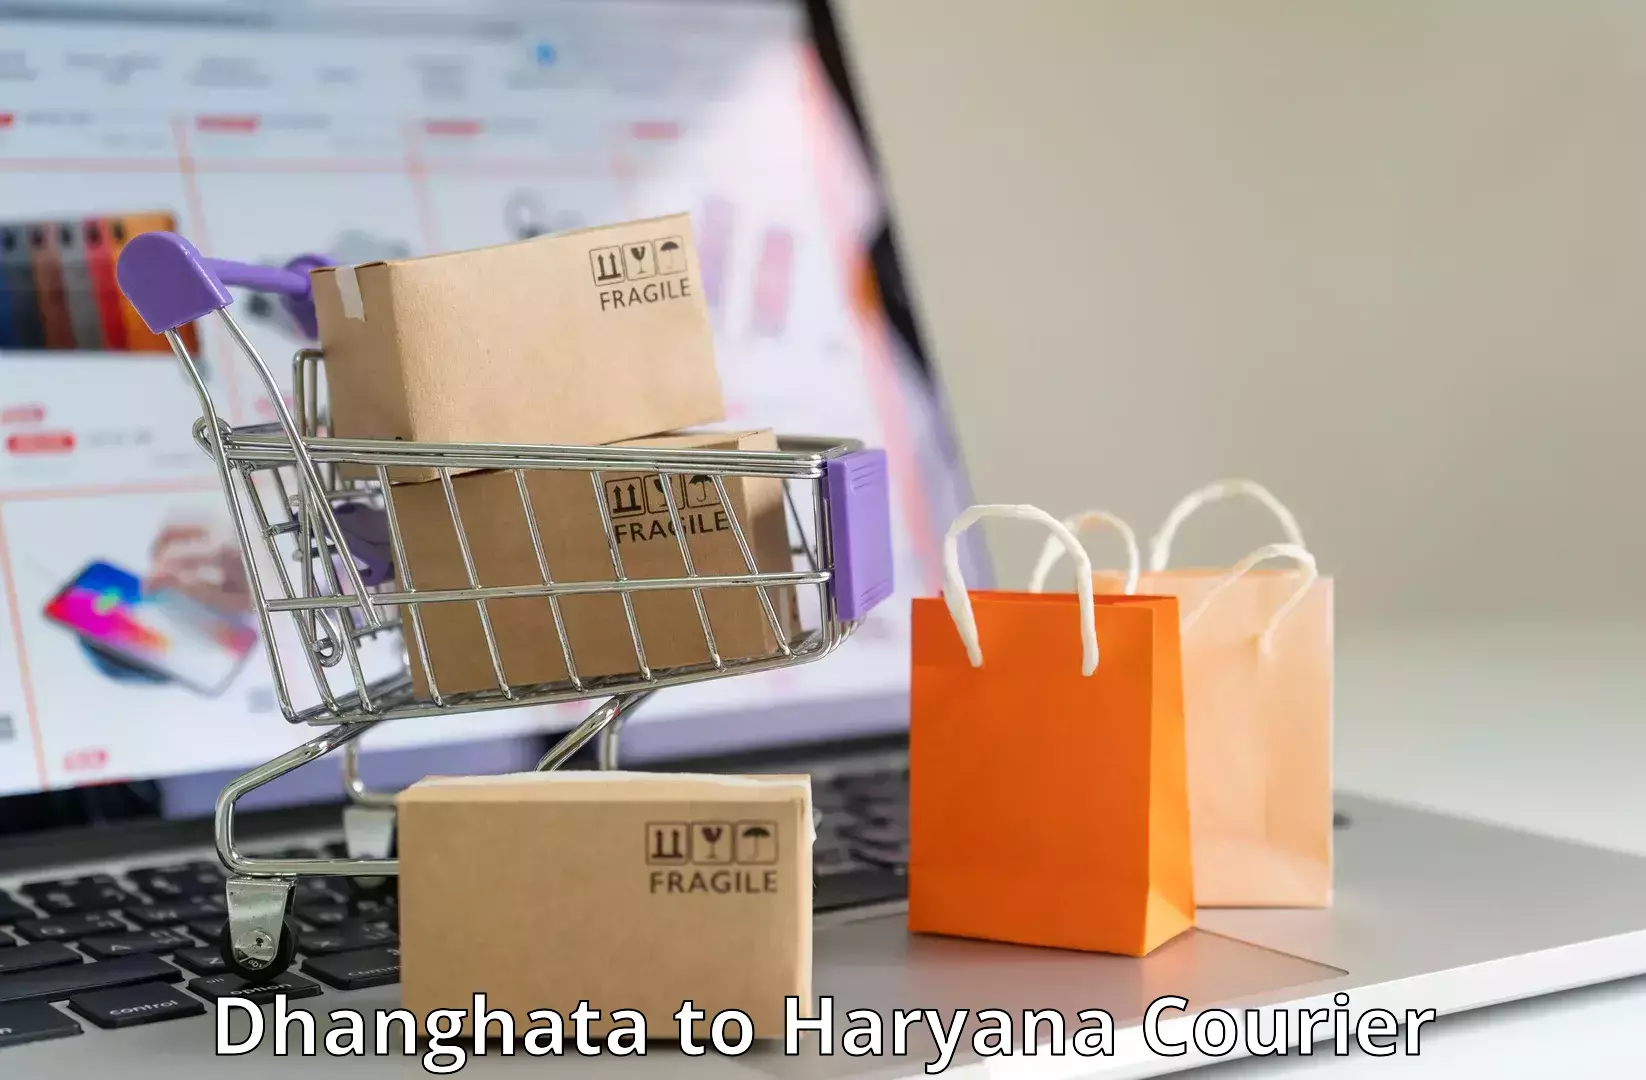 Corporate courier solutions Dhanghata to Chaudhary Charan Singh Haryana Agricultural University Hisar